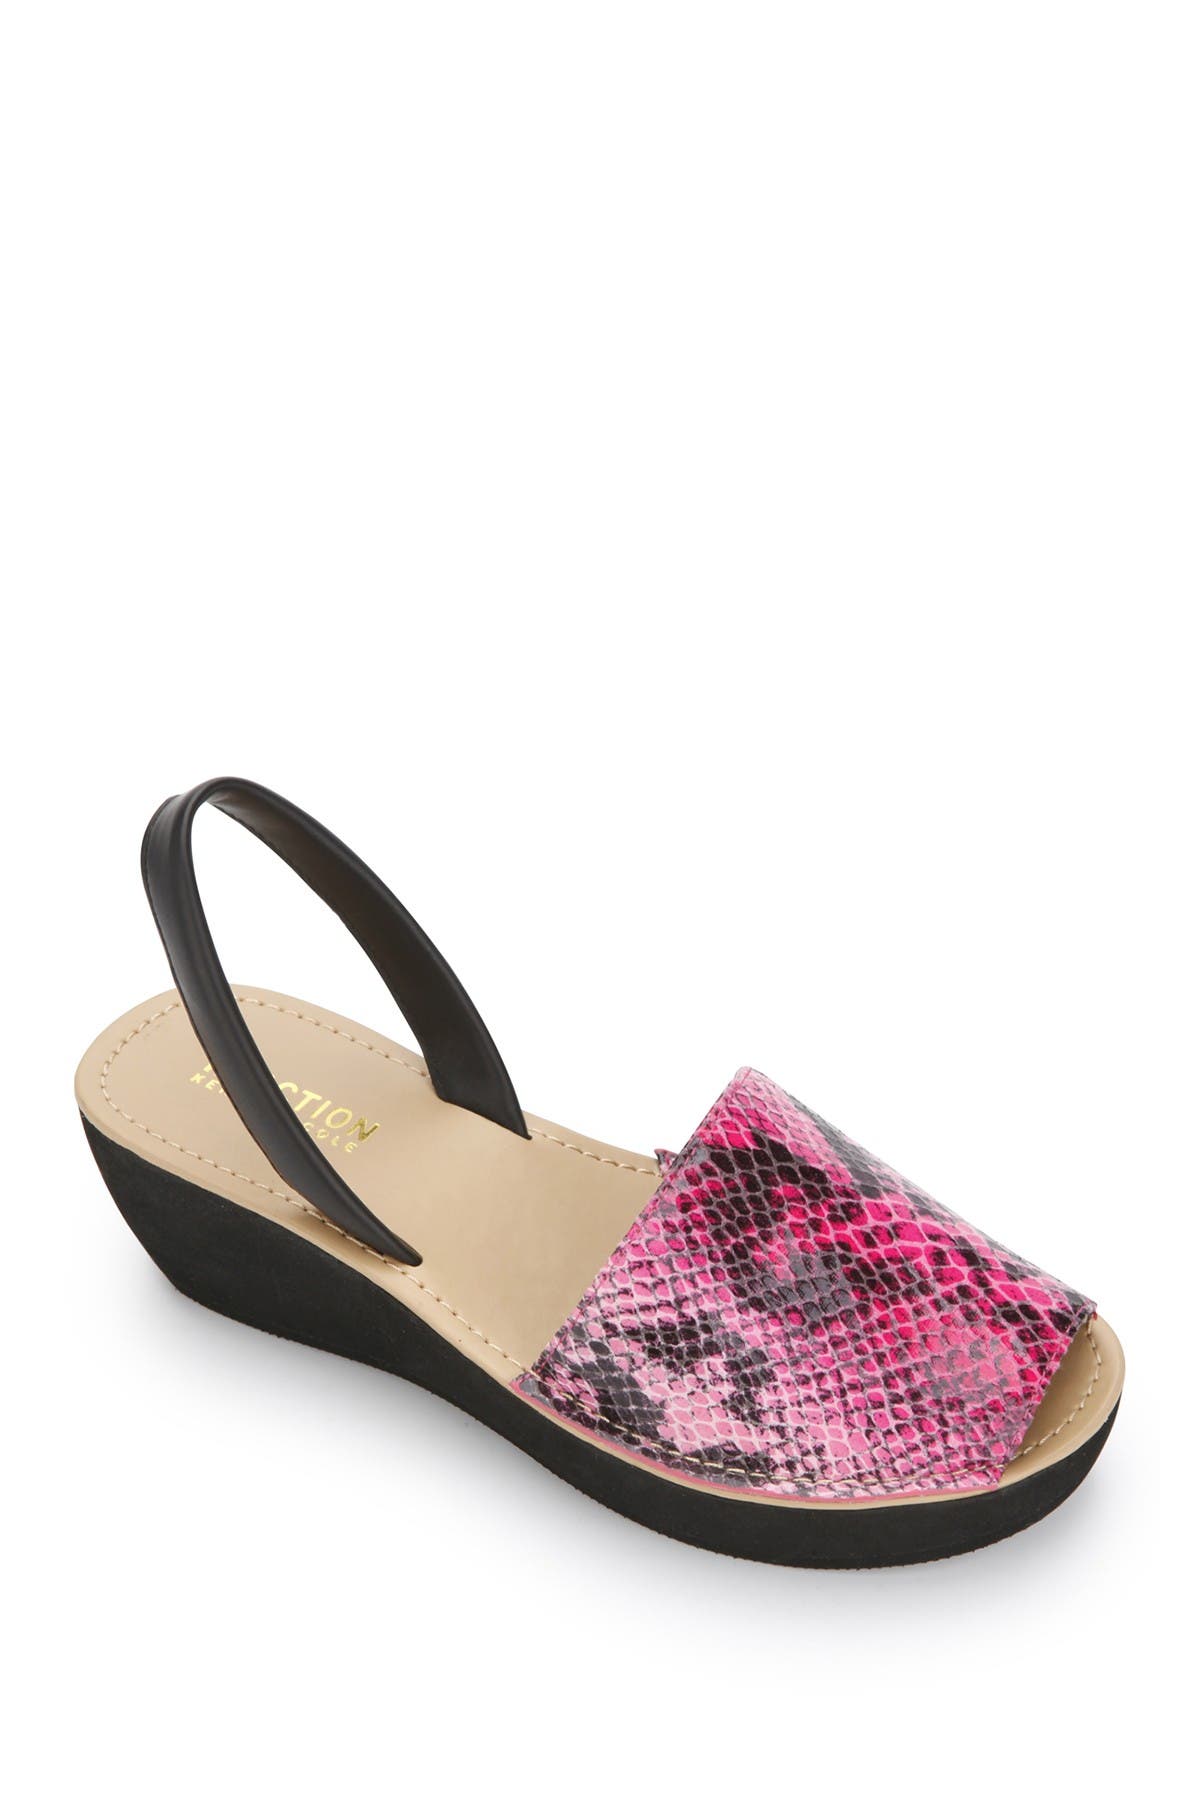 Kenneth Cole Reaction Fine Glass Sandal In Bright Pink1